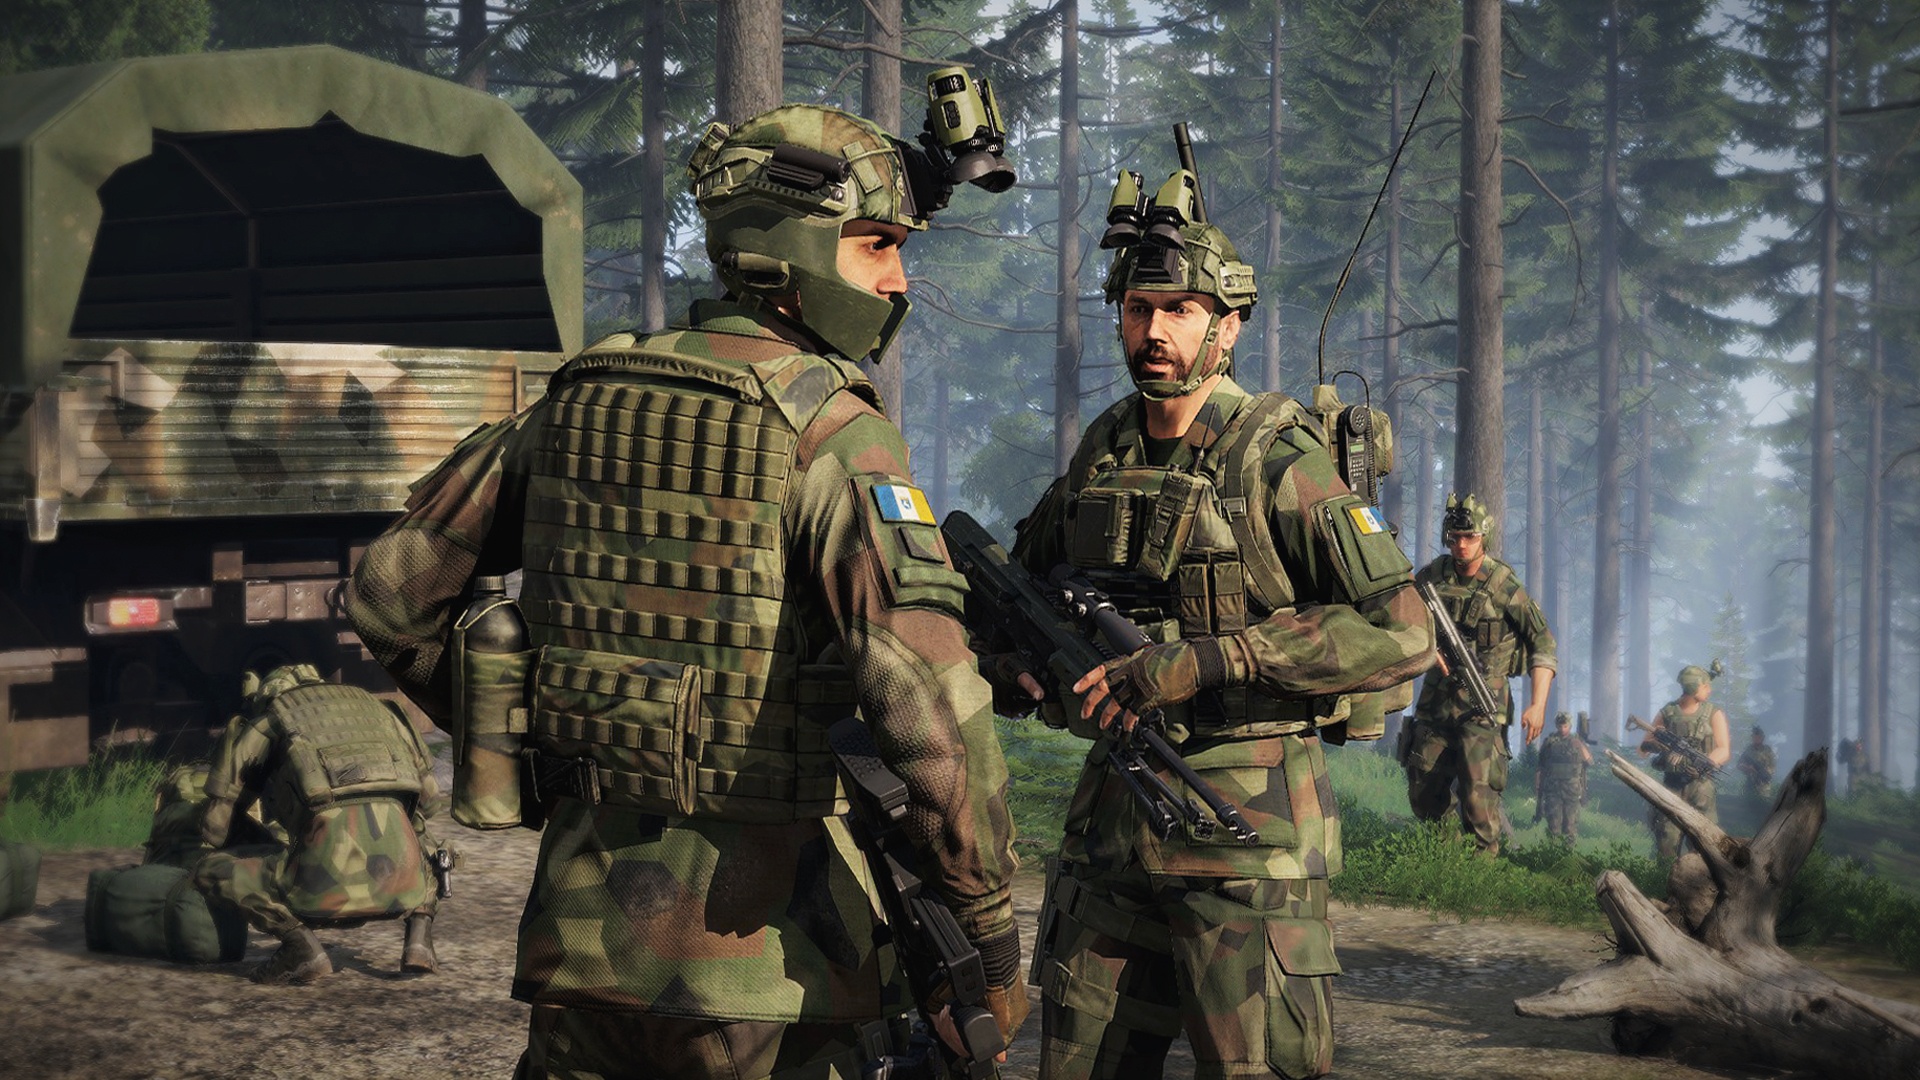 Steam Community :: Guide :: Getting started with Arma 3 in 2019